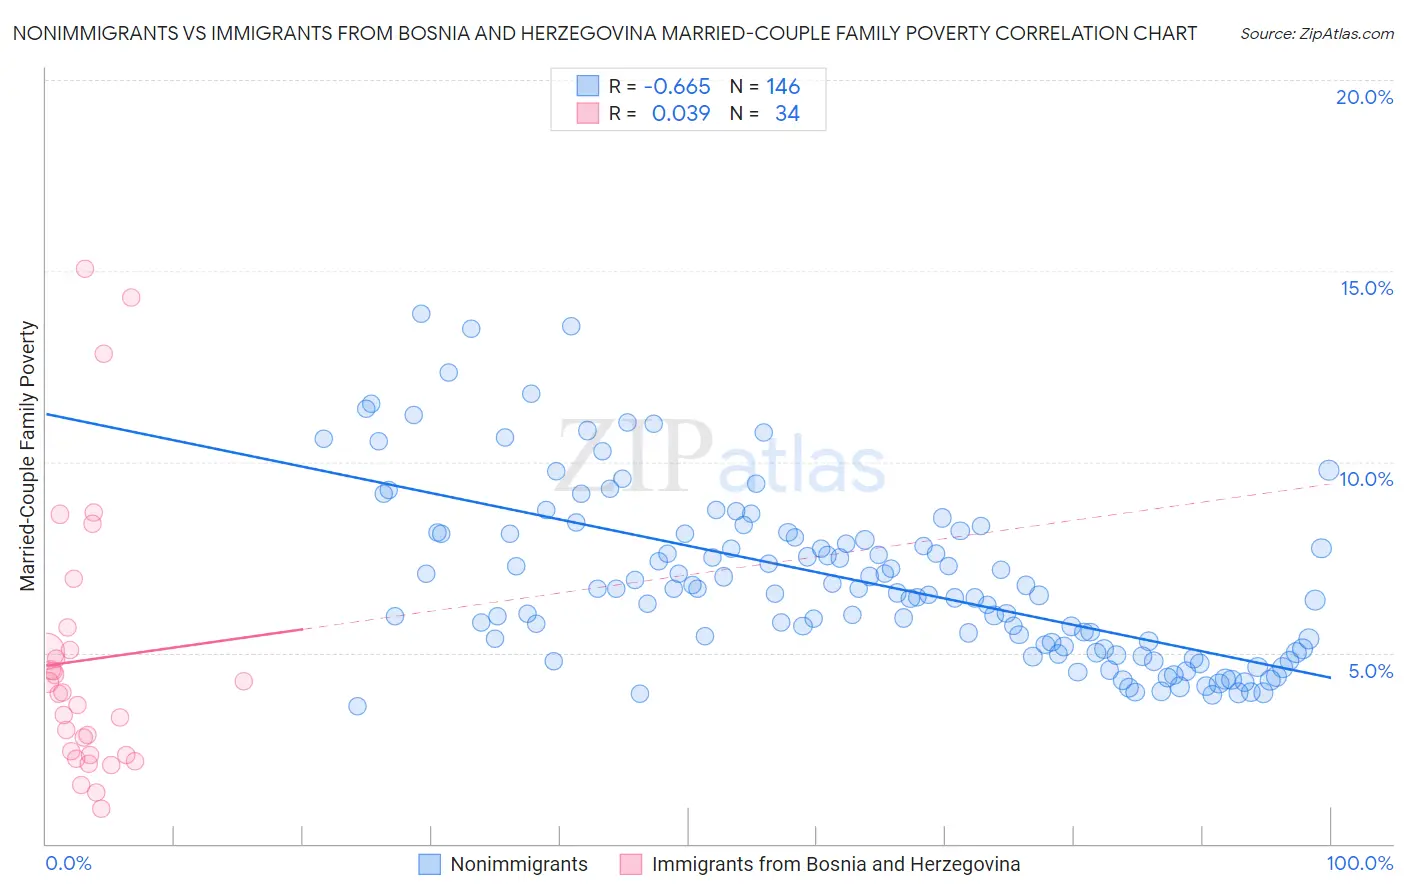 Nonimmigrants vs Immigrants from Bosnia and Herzegovina Married-Couple Family Poverty